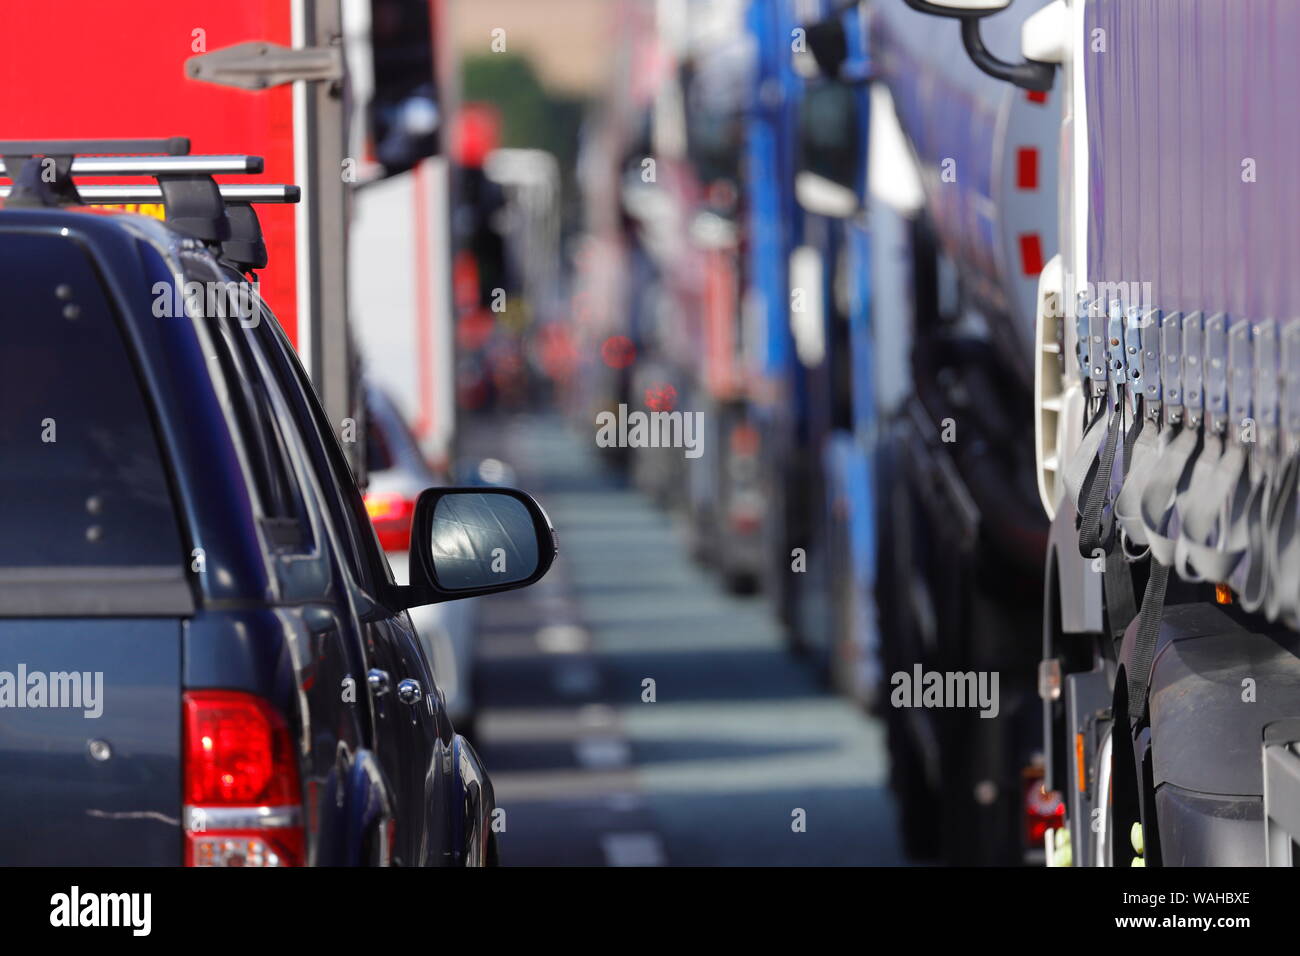 Traffic at a standstill on the M62 between junction 31 & 30 on the Westbound carriageway due to an accident involving a motorcyclist and lorry. Stock Photo